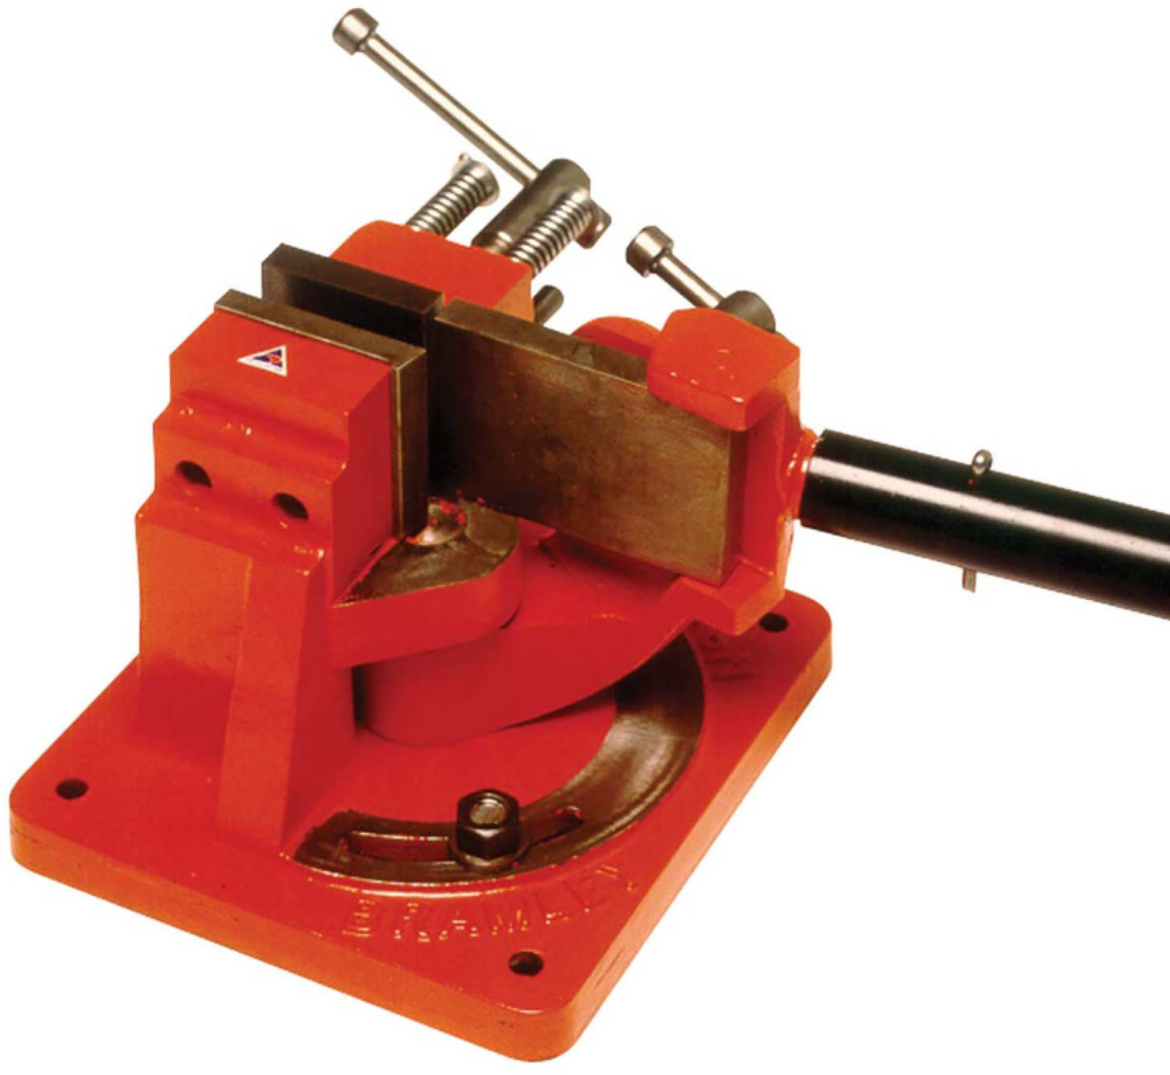 Picture of BRAMLEY No.2 ANGLE BAR BENDER